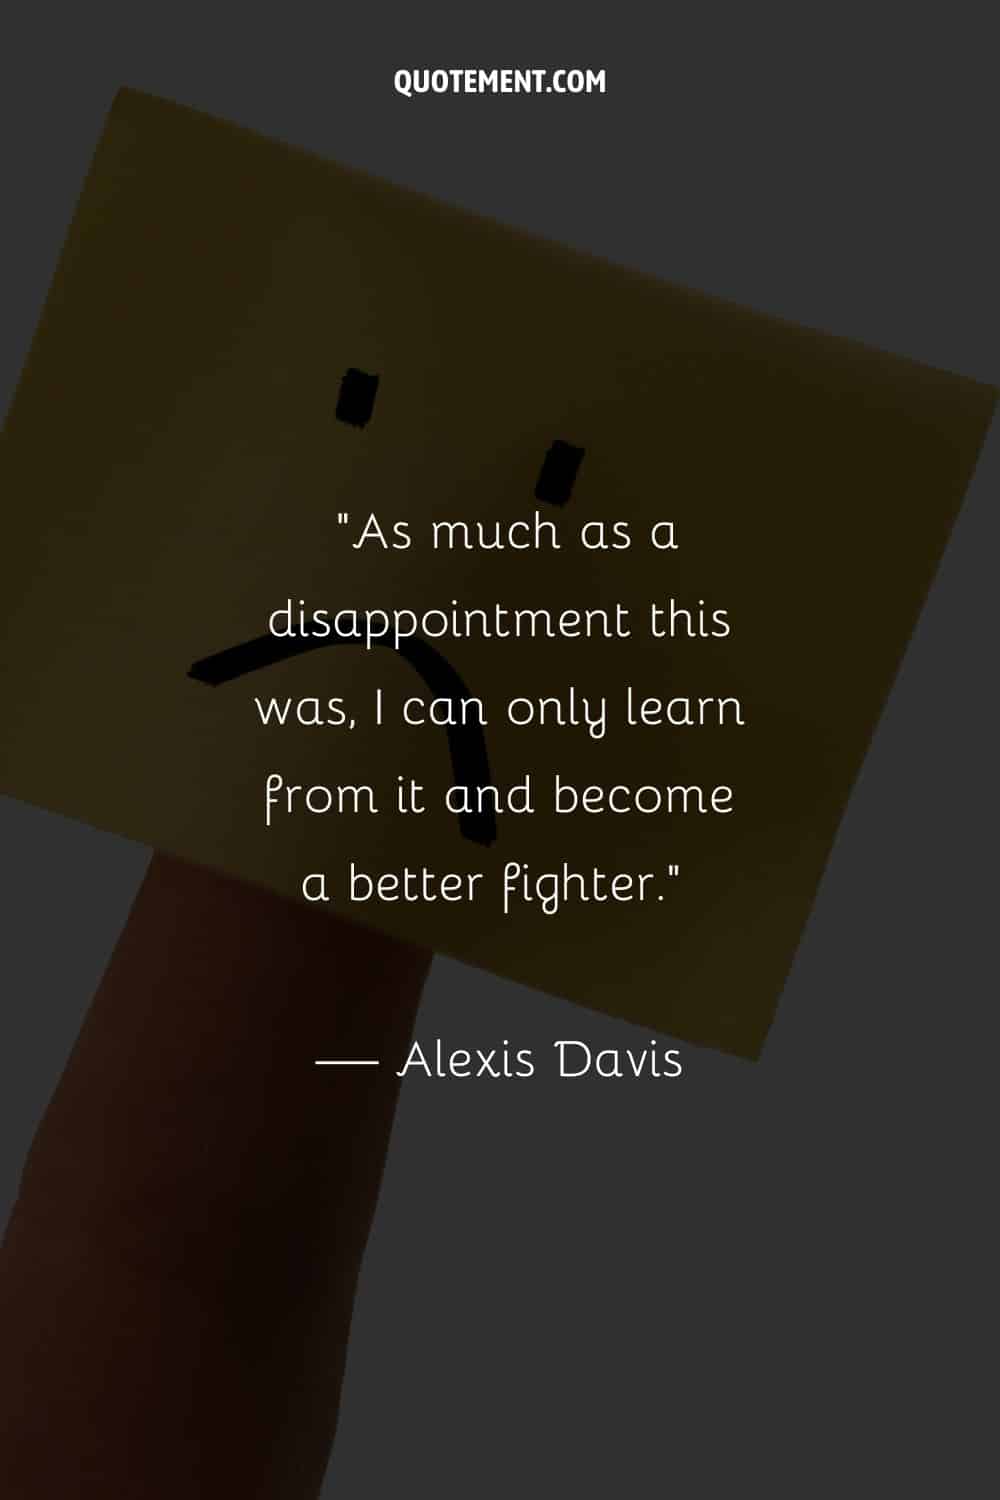 As much as a disappointment this was, I can only learn from it and become a better fighter